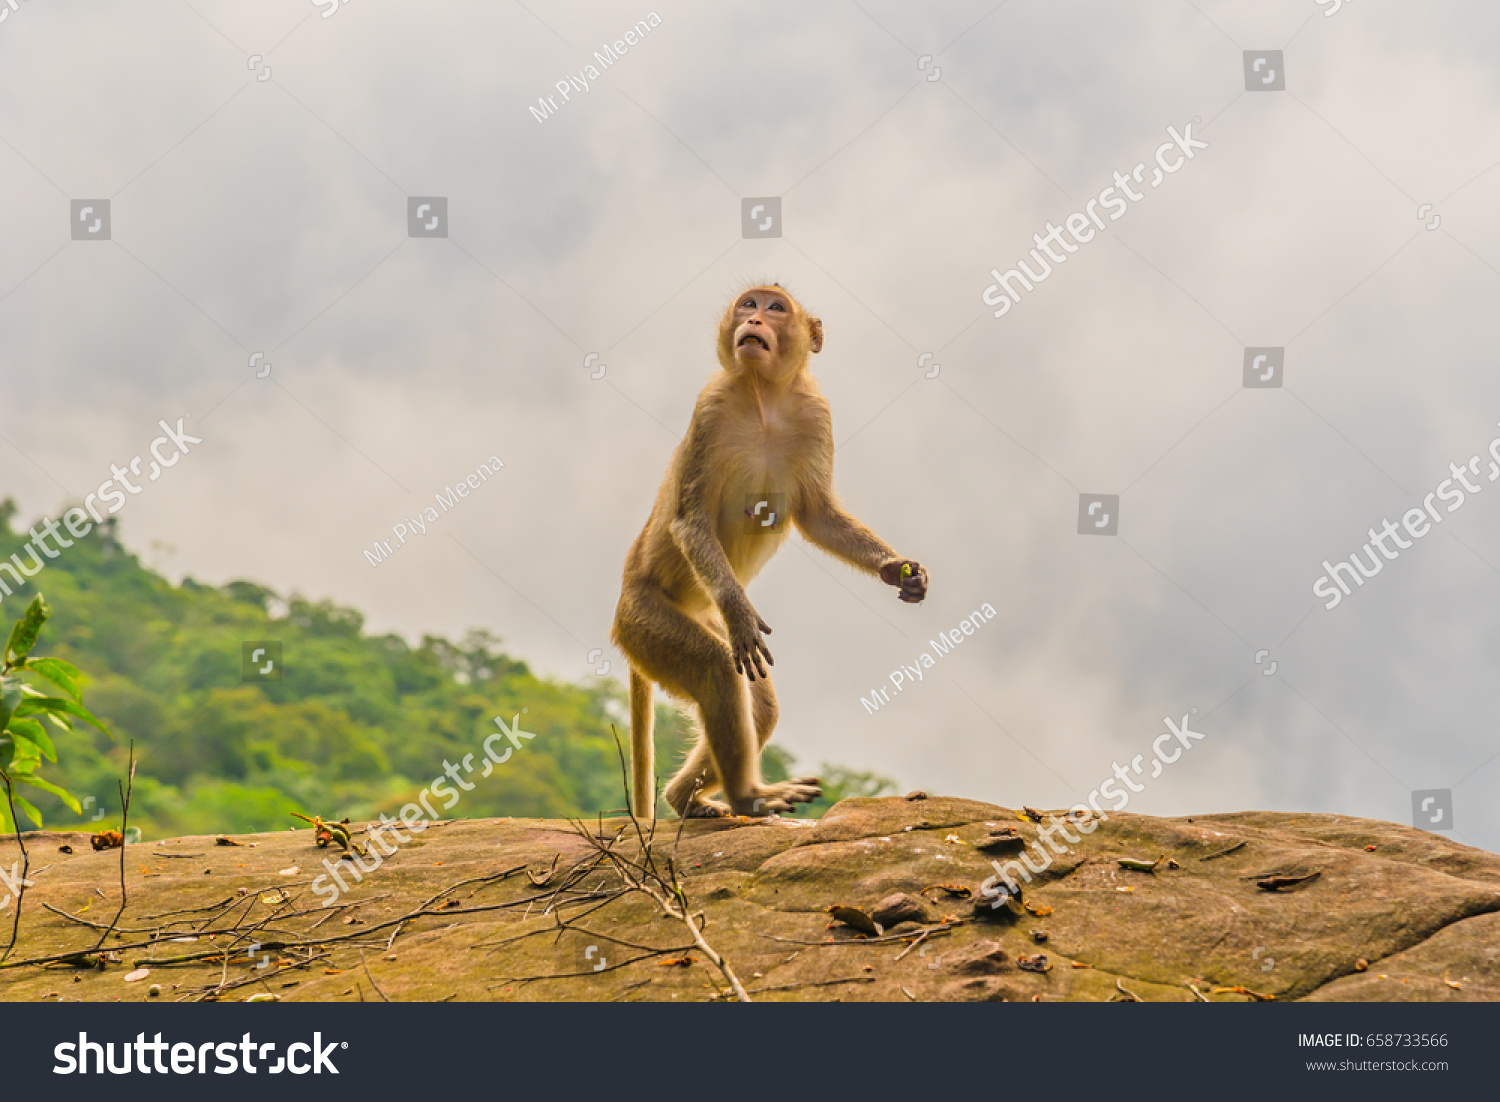 Brown Monkey takes on human like  characteristics, as it stands erect on a large rocky outcrop against a cloudy  sky. #658733566